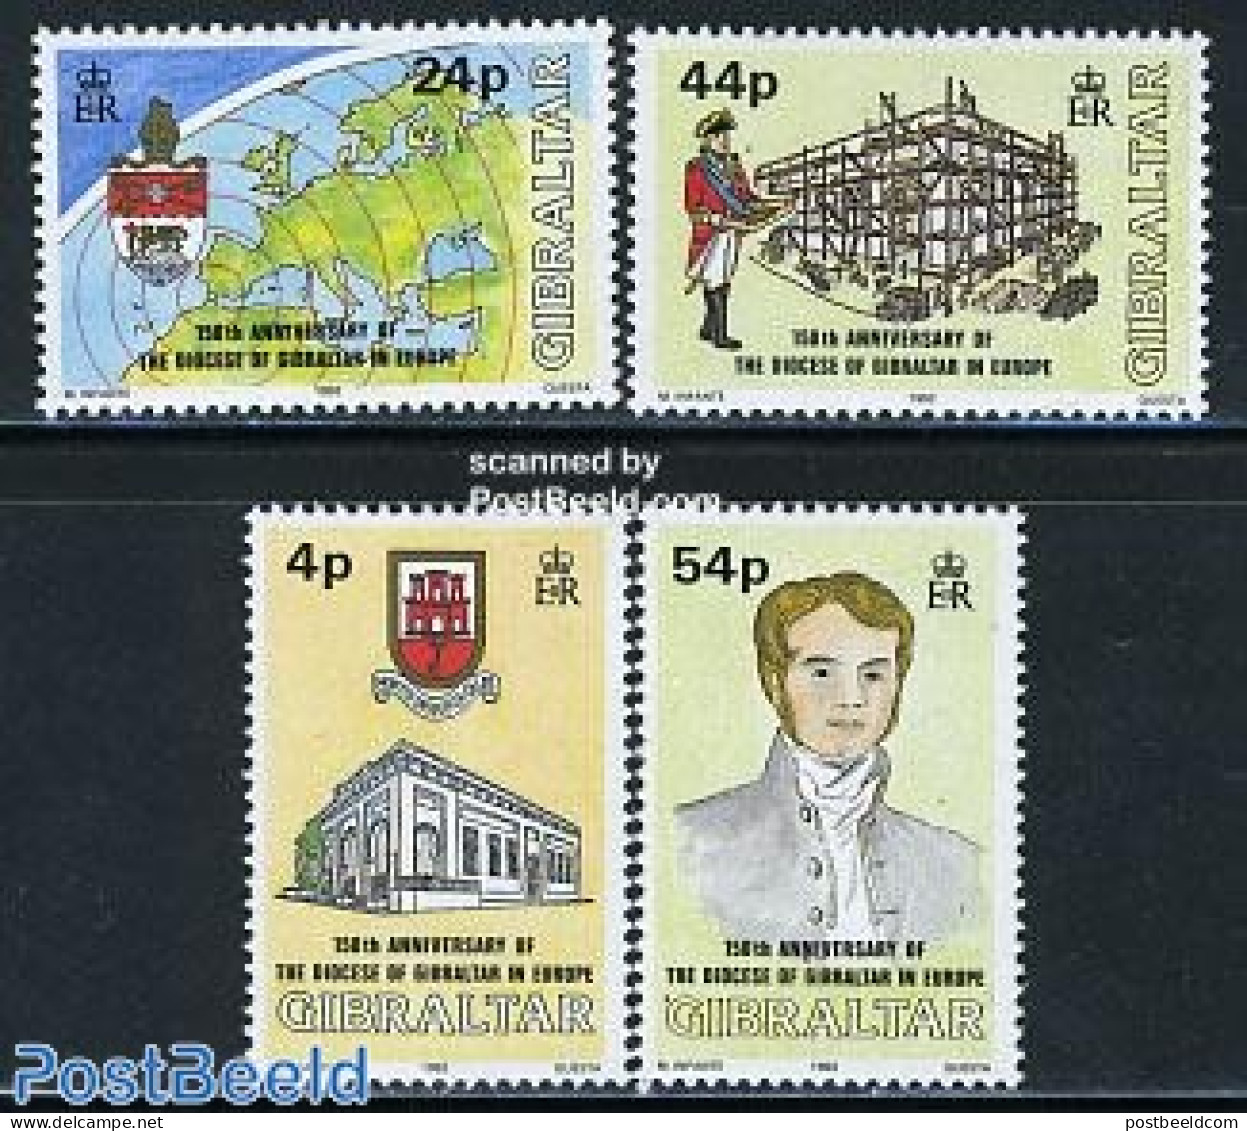 Gibraltar 1992 Diocese Of Gibraltar In Europe 4v, Mint NH, History - Religion - Various - Coat Of Arms - Europa Hang-o.. - Idee Europee